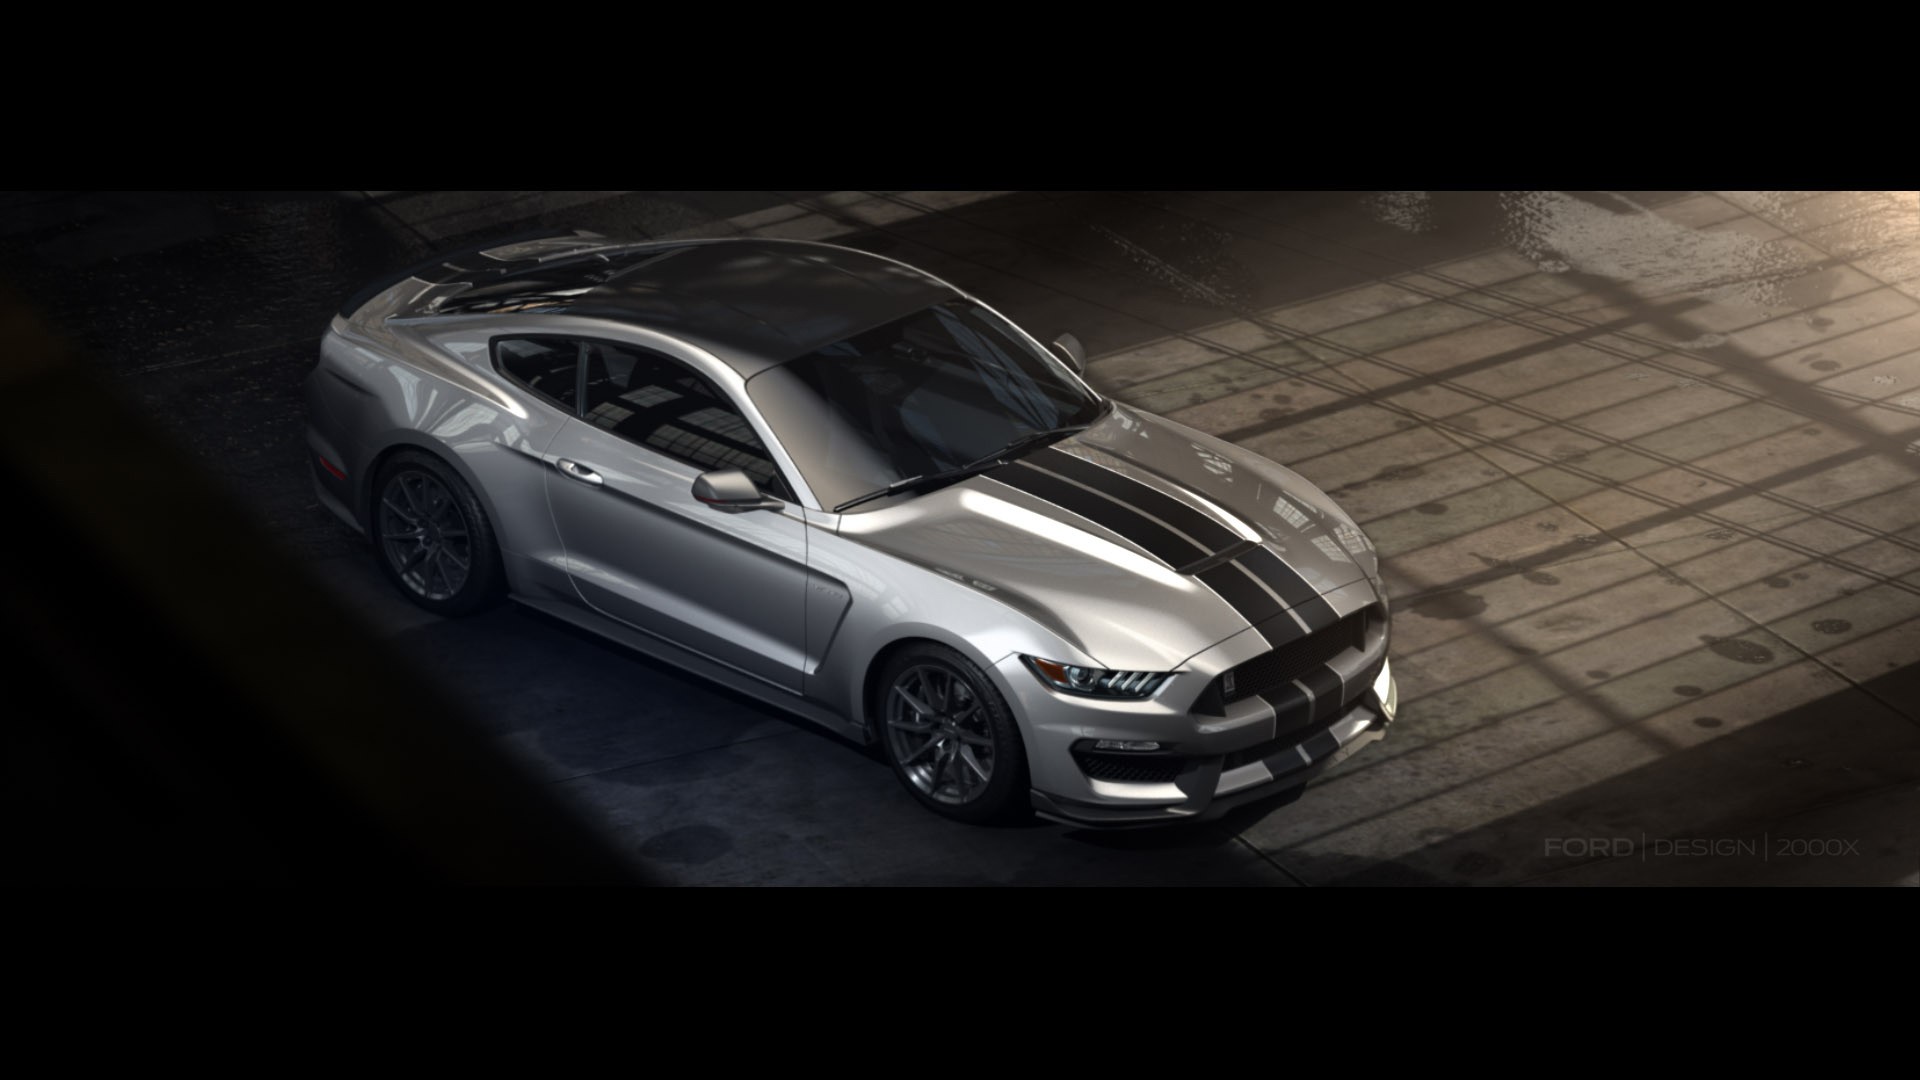 General 1920x1080 car Ford Mustang Shelby Ford Ford Mustang Shelby silver cars vehicle muscle cars American cars